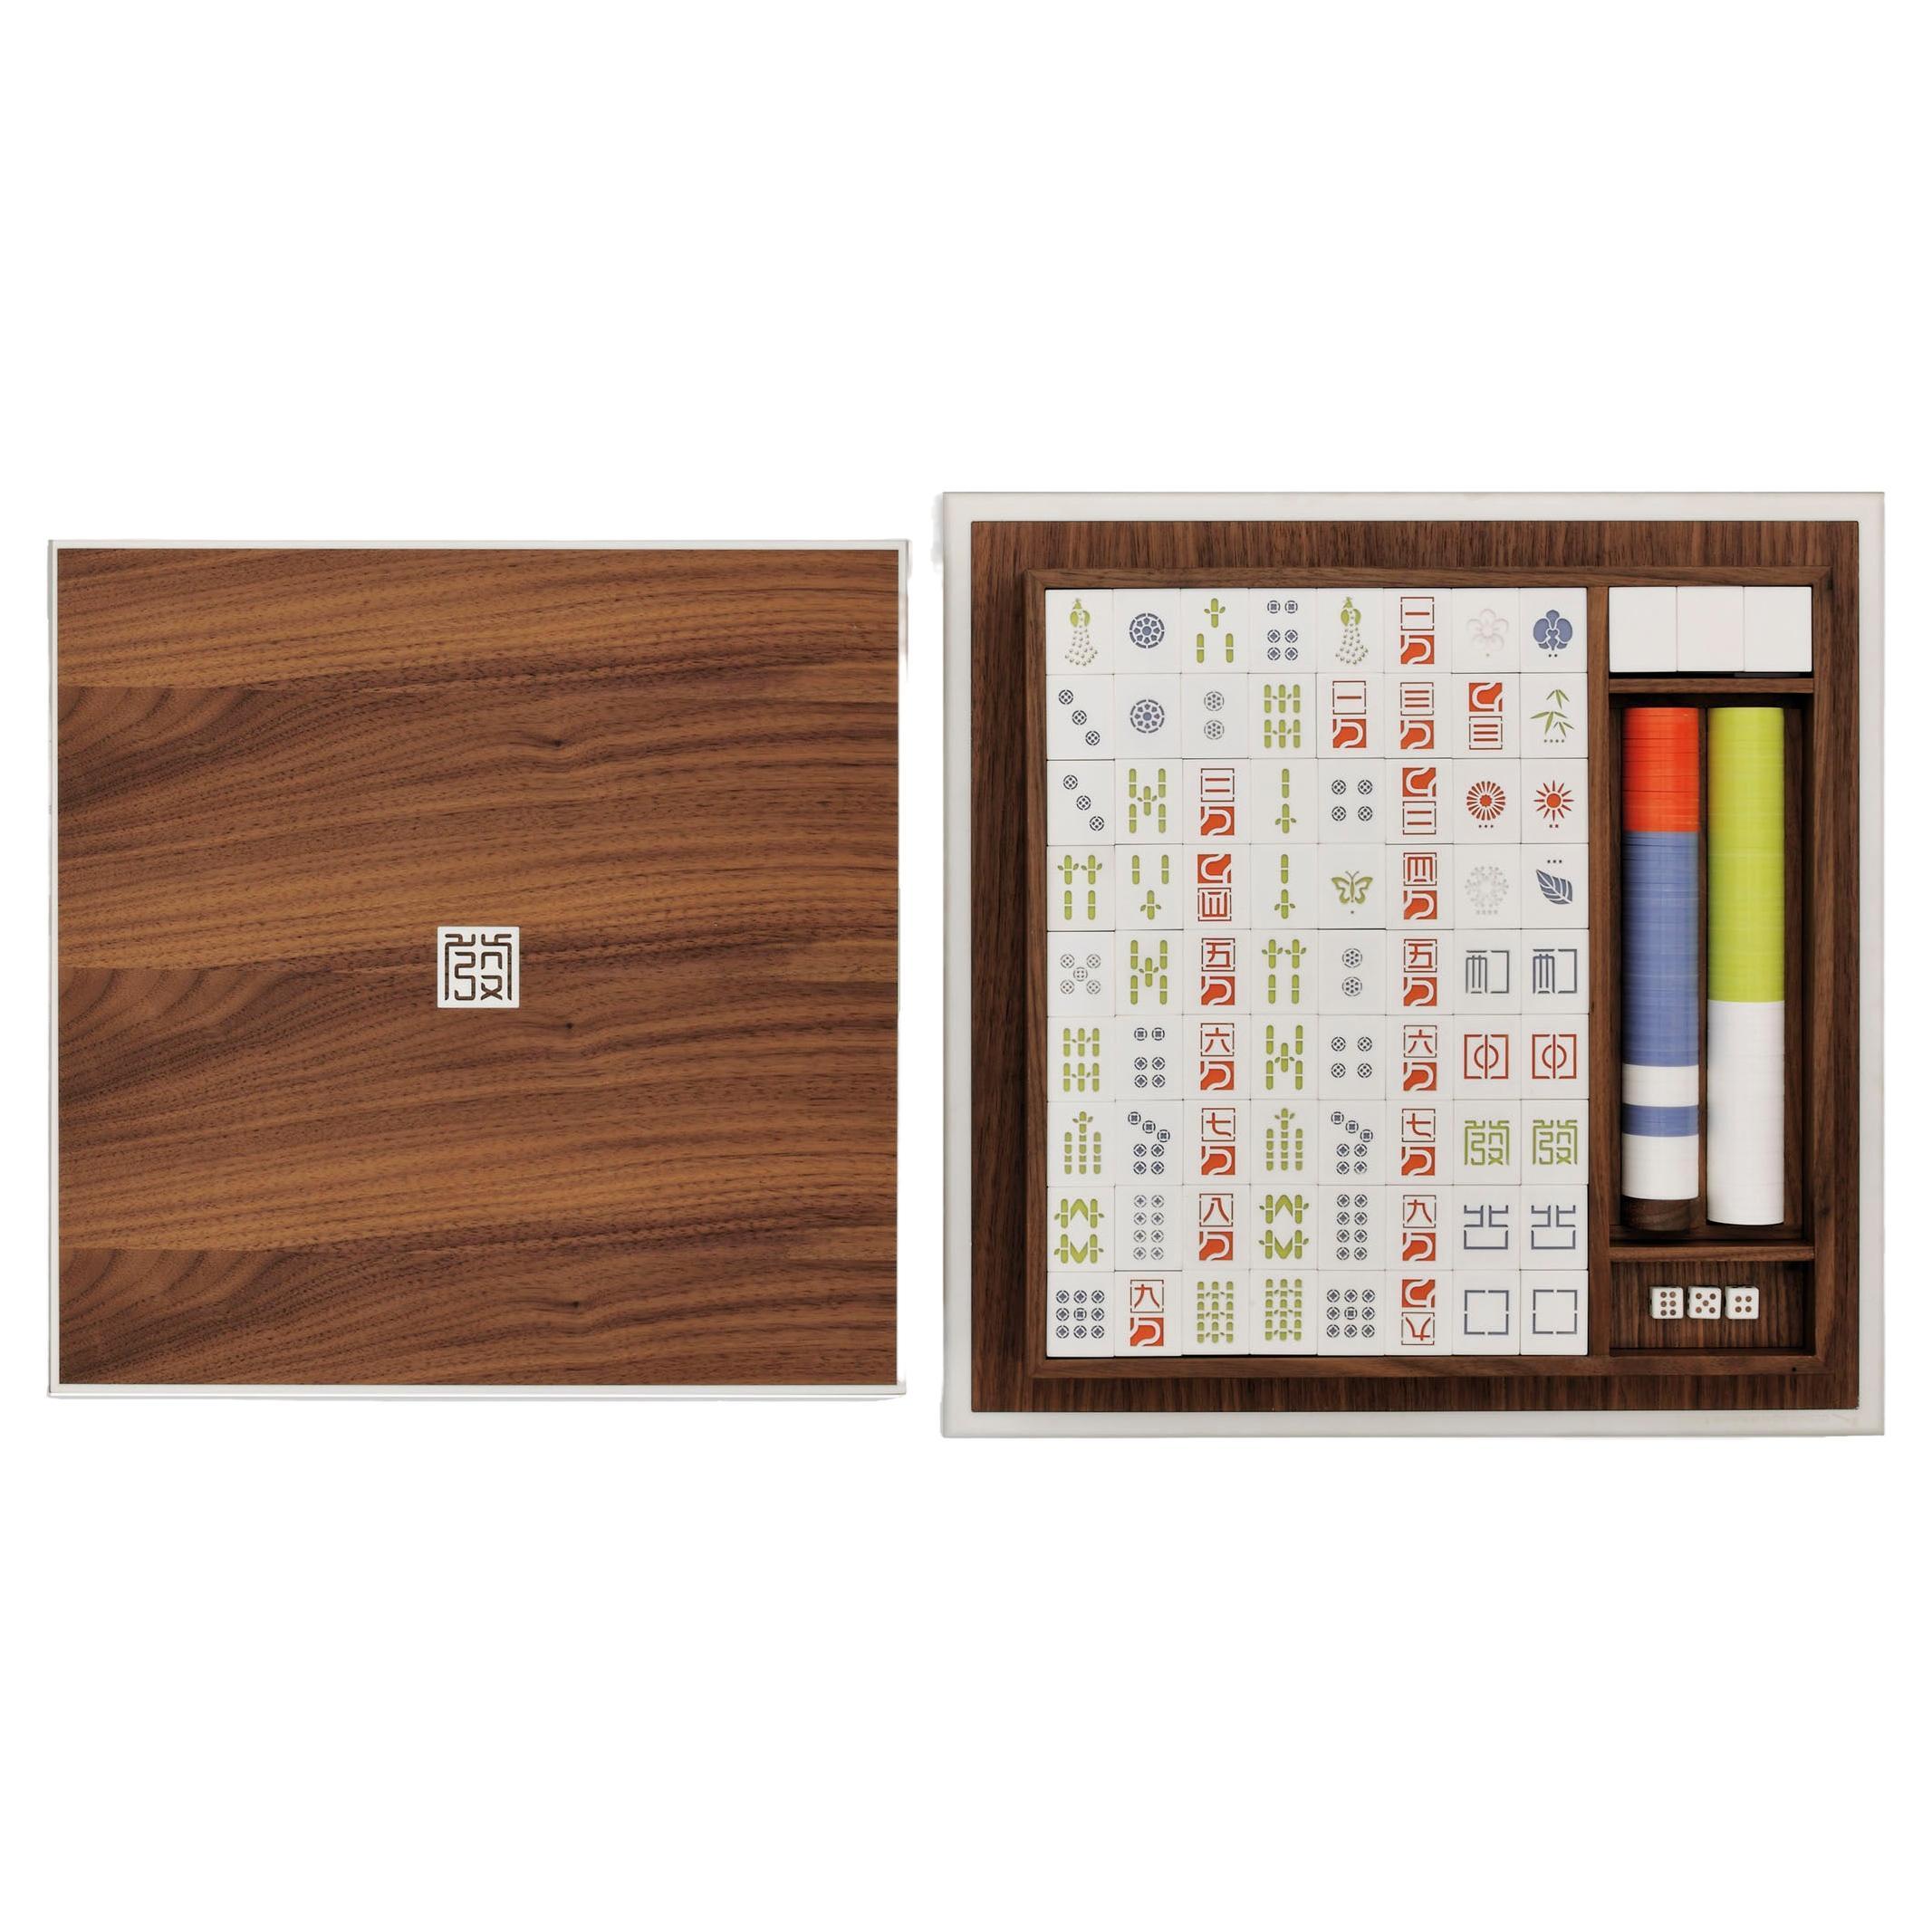 Fa'i', Mahjong, board game made of solid walnut and Corian For Sale